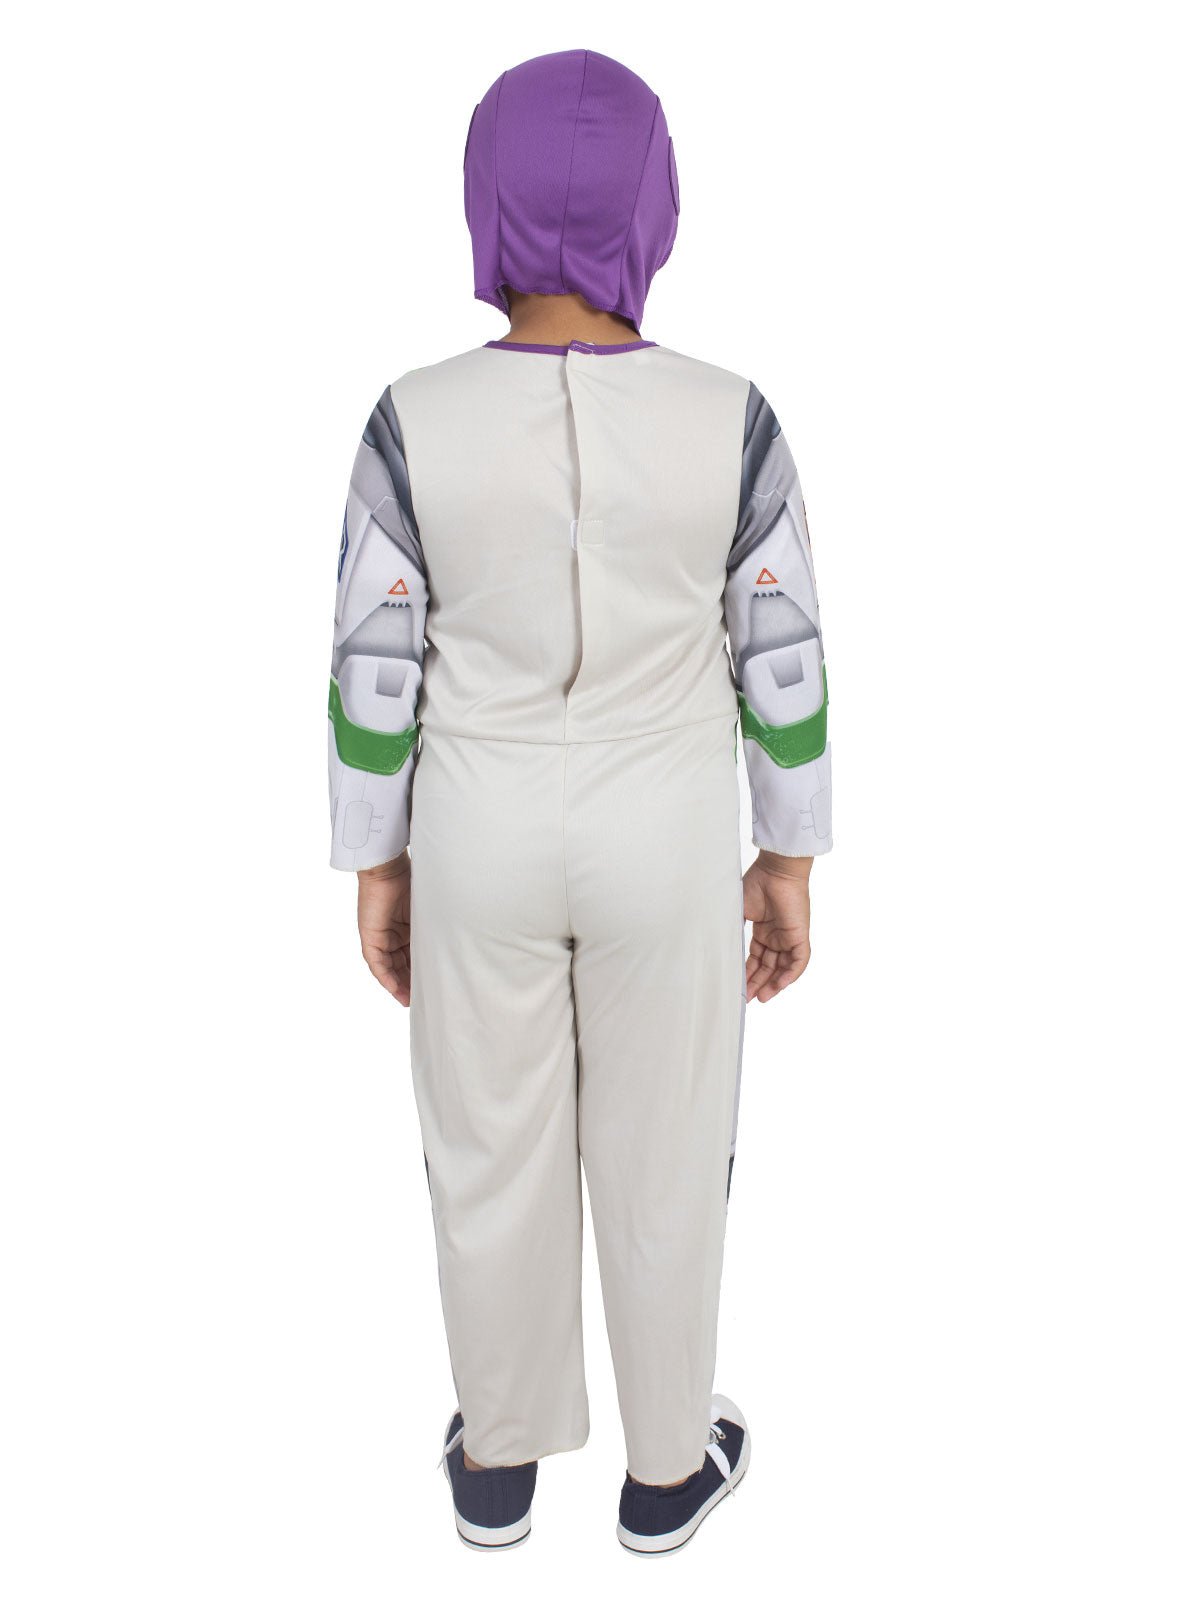 Features of Buzz Lightyear Costume